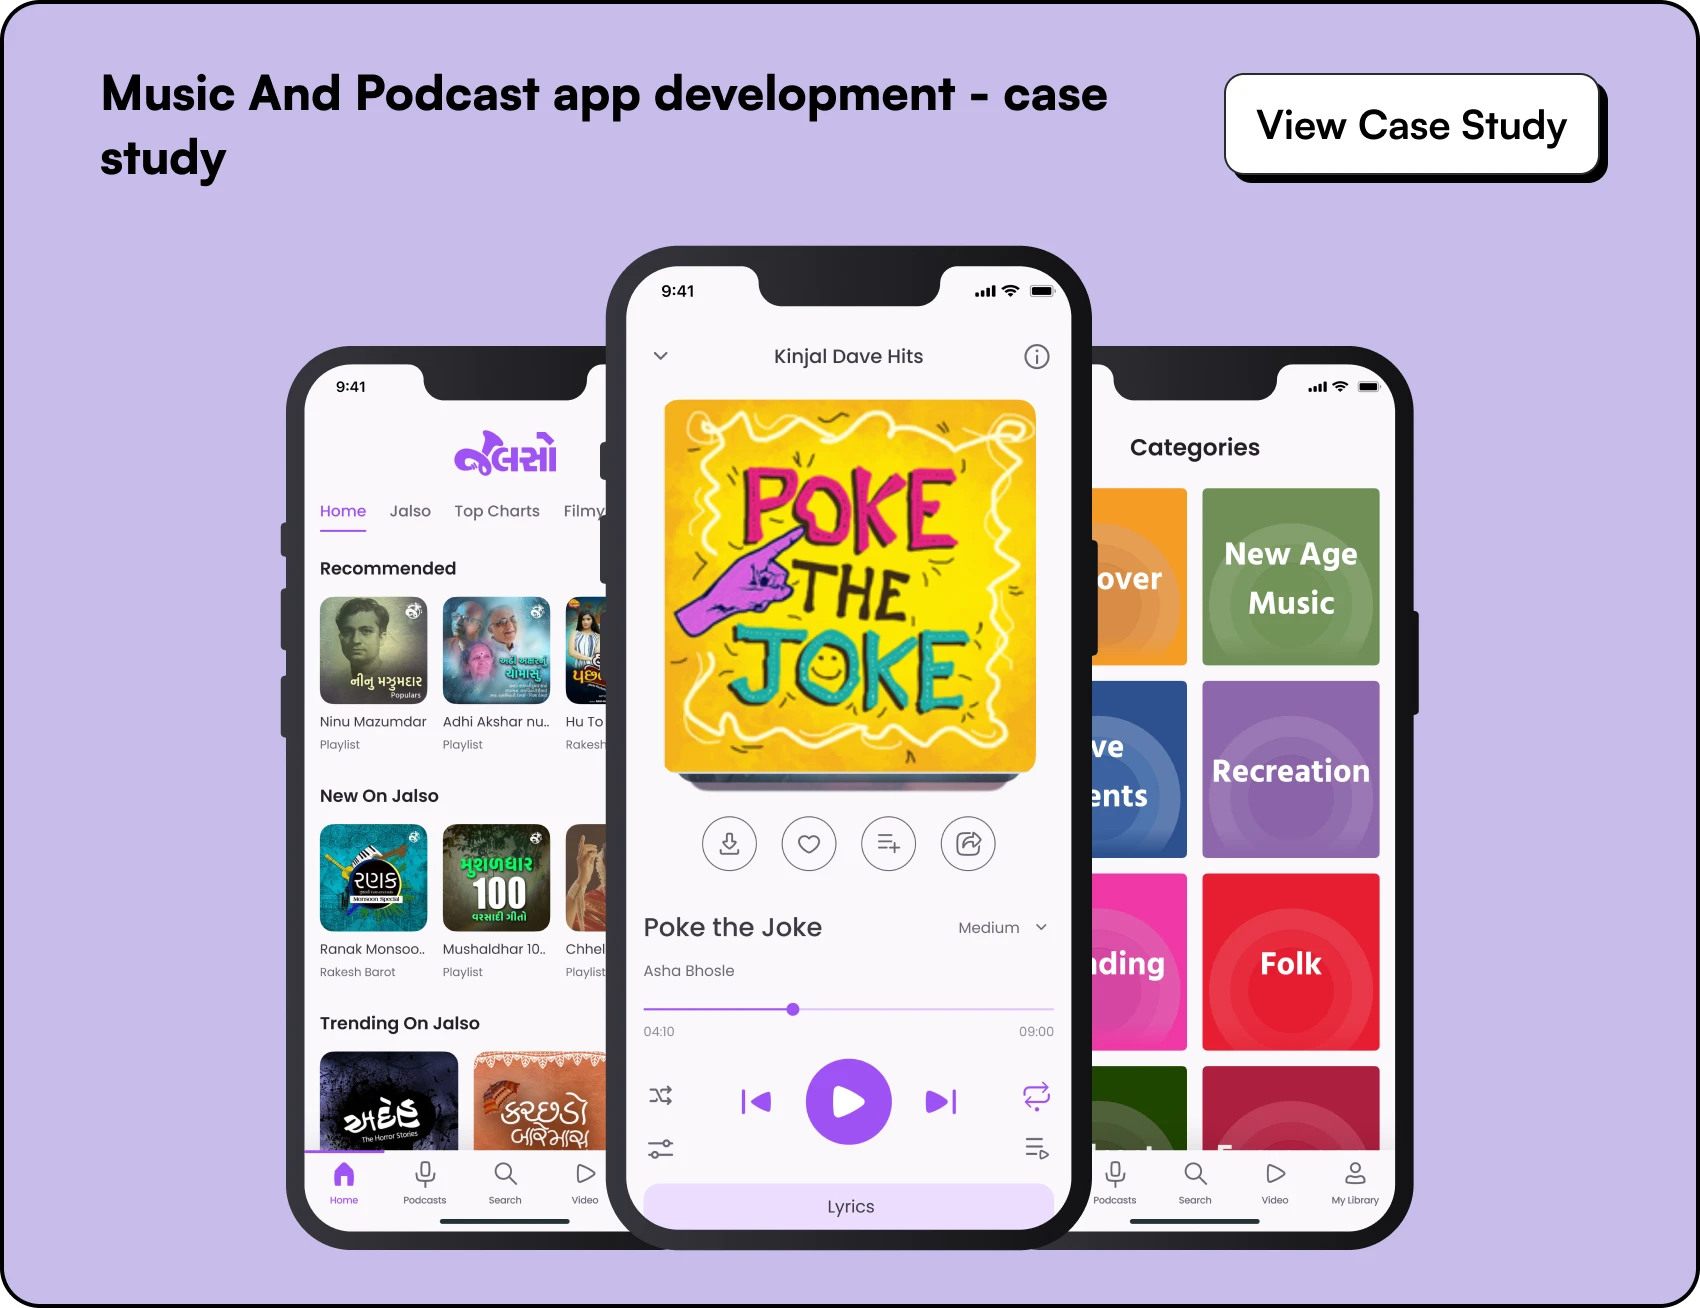 Music And Podcast app development - case study